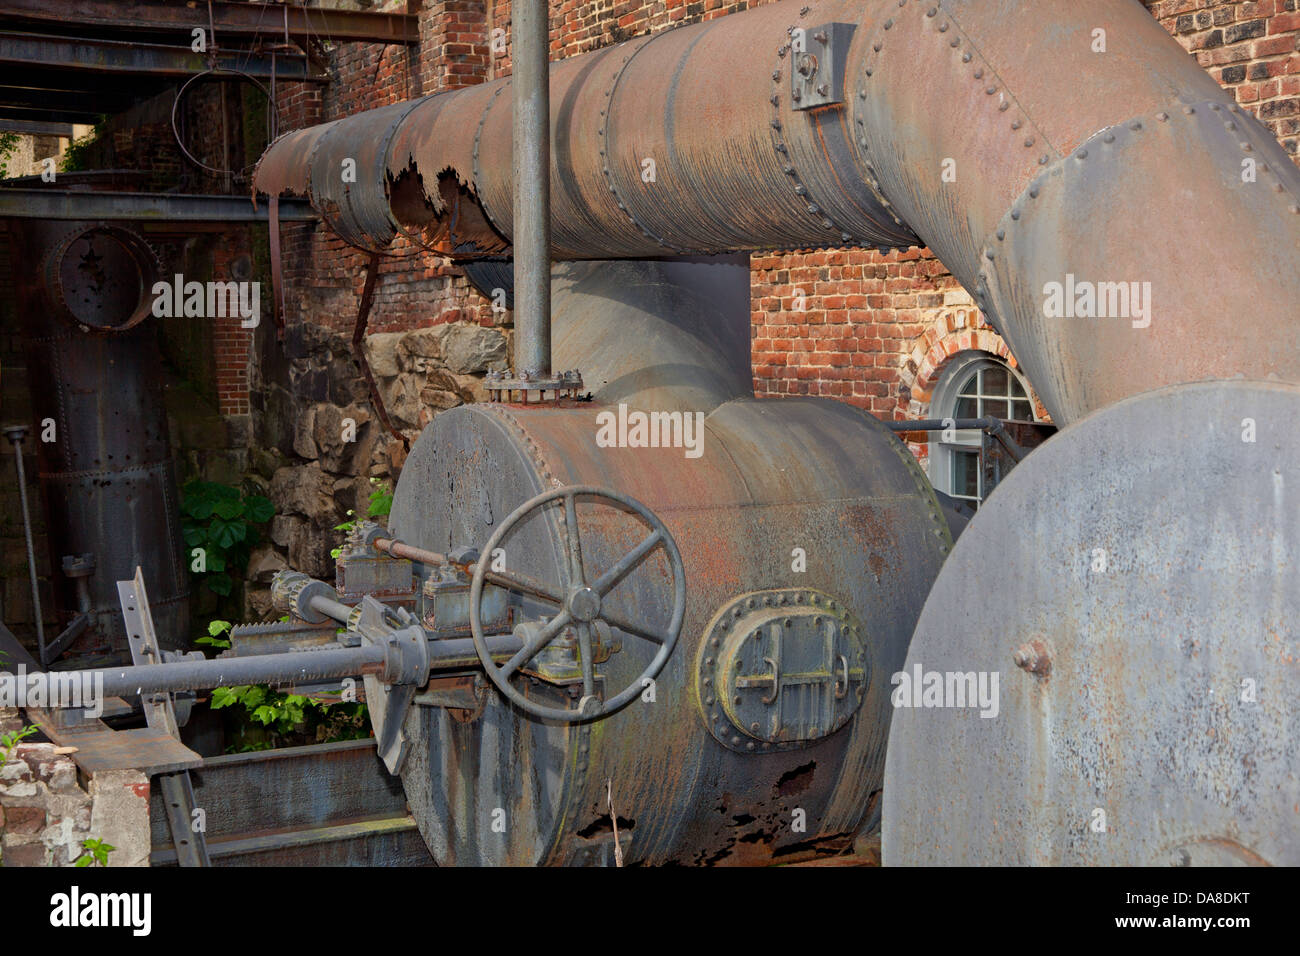 Old rusty furnaces at Tredegar Ironworks in Richmond, VA Stock Photo